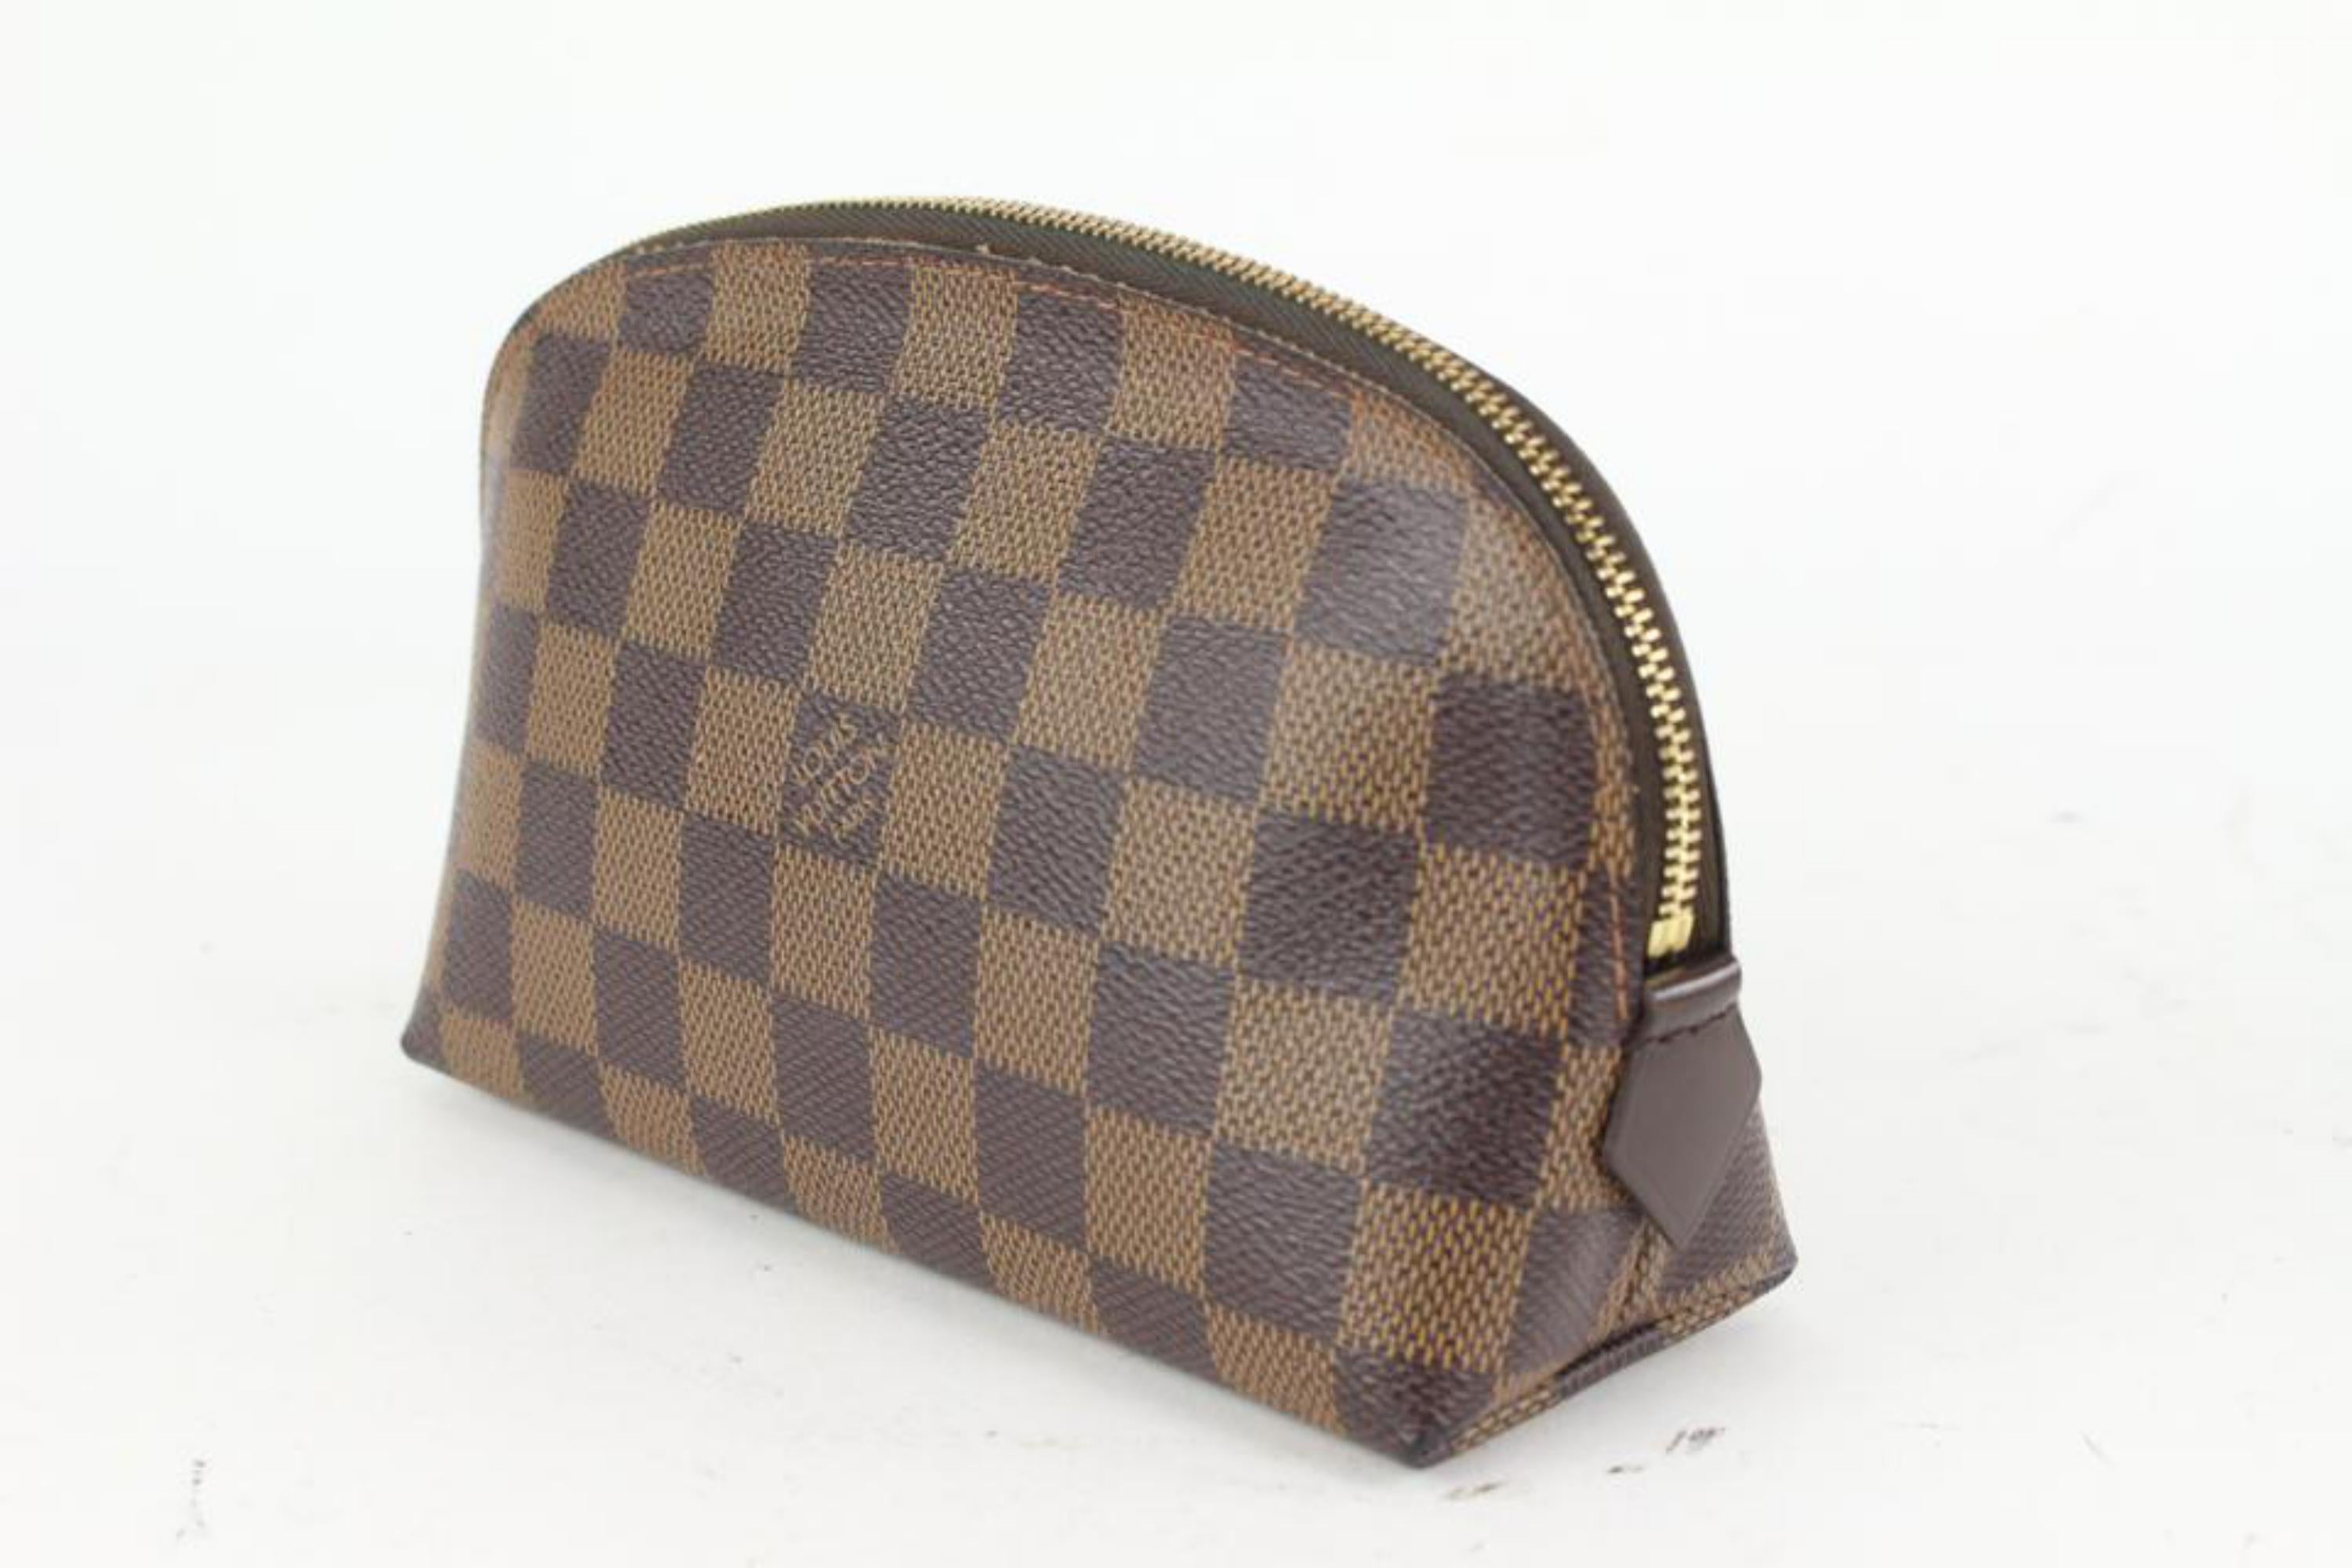 Louis Vuitton Damier Ebene Cosmetic Pouch Demi Ronde 12L415V
Date Code/Serial Number: CA2112
Made In: Spain
Measurements: Length:  7.5